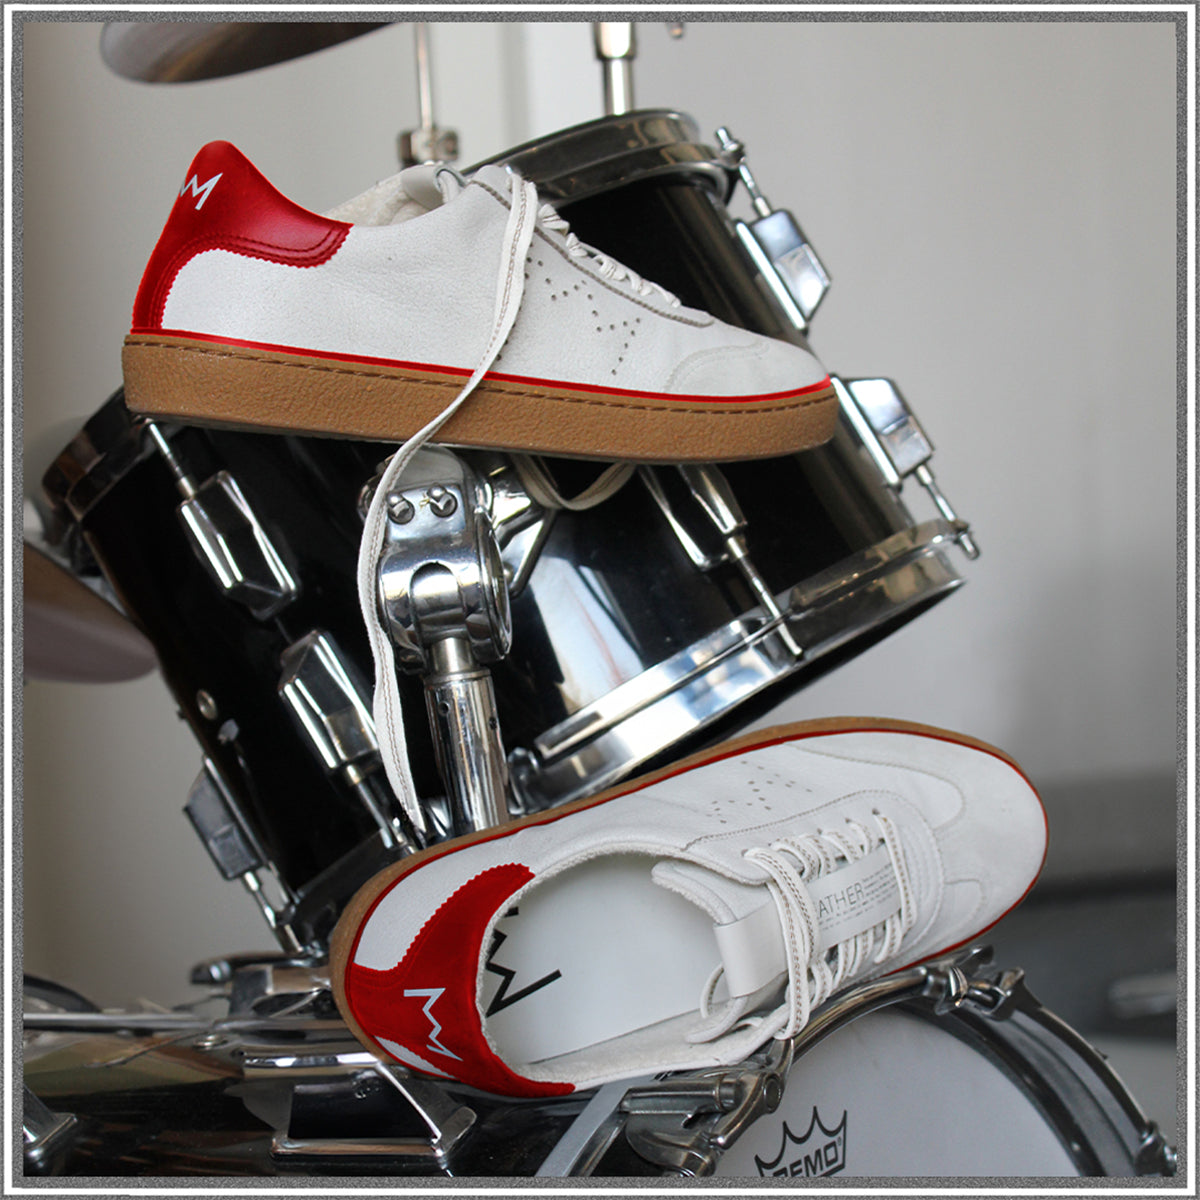 Model T retro low top sneaker style positioned on drum kit.